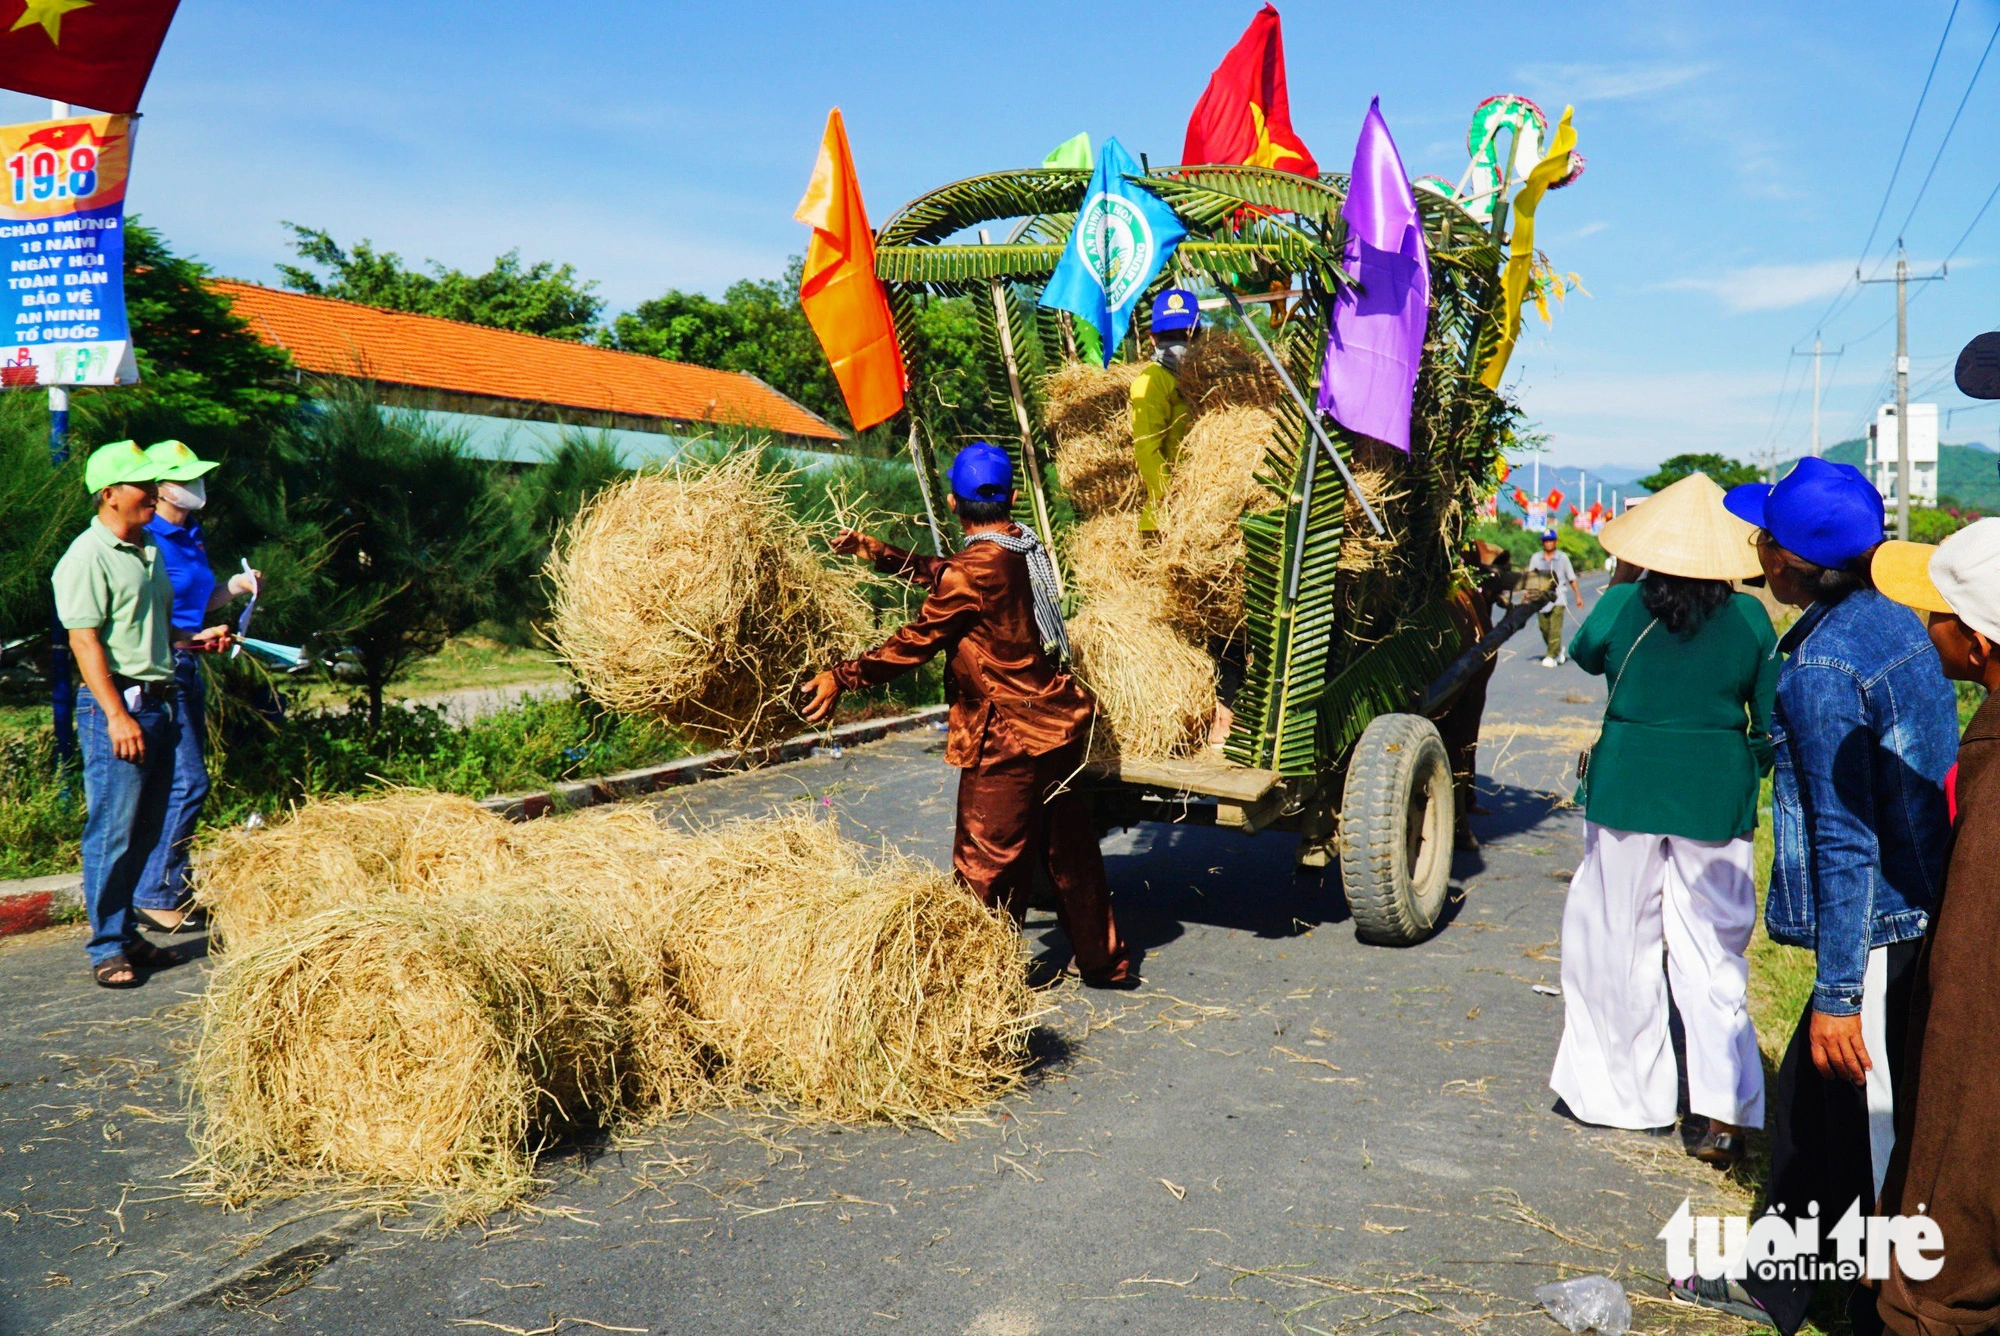 The more straw rolls cow carts can carry, the more marks teams will get. Photo: Tran Hoai / Tuoi Tre